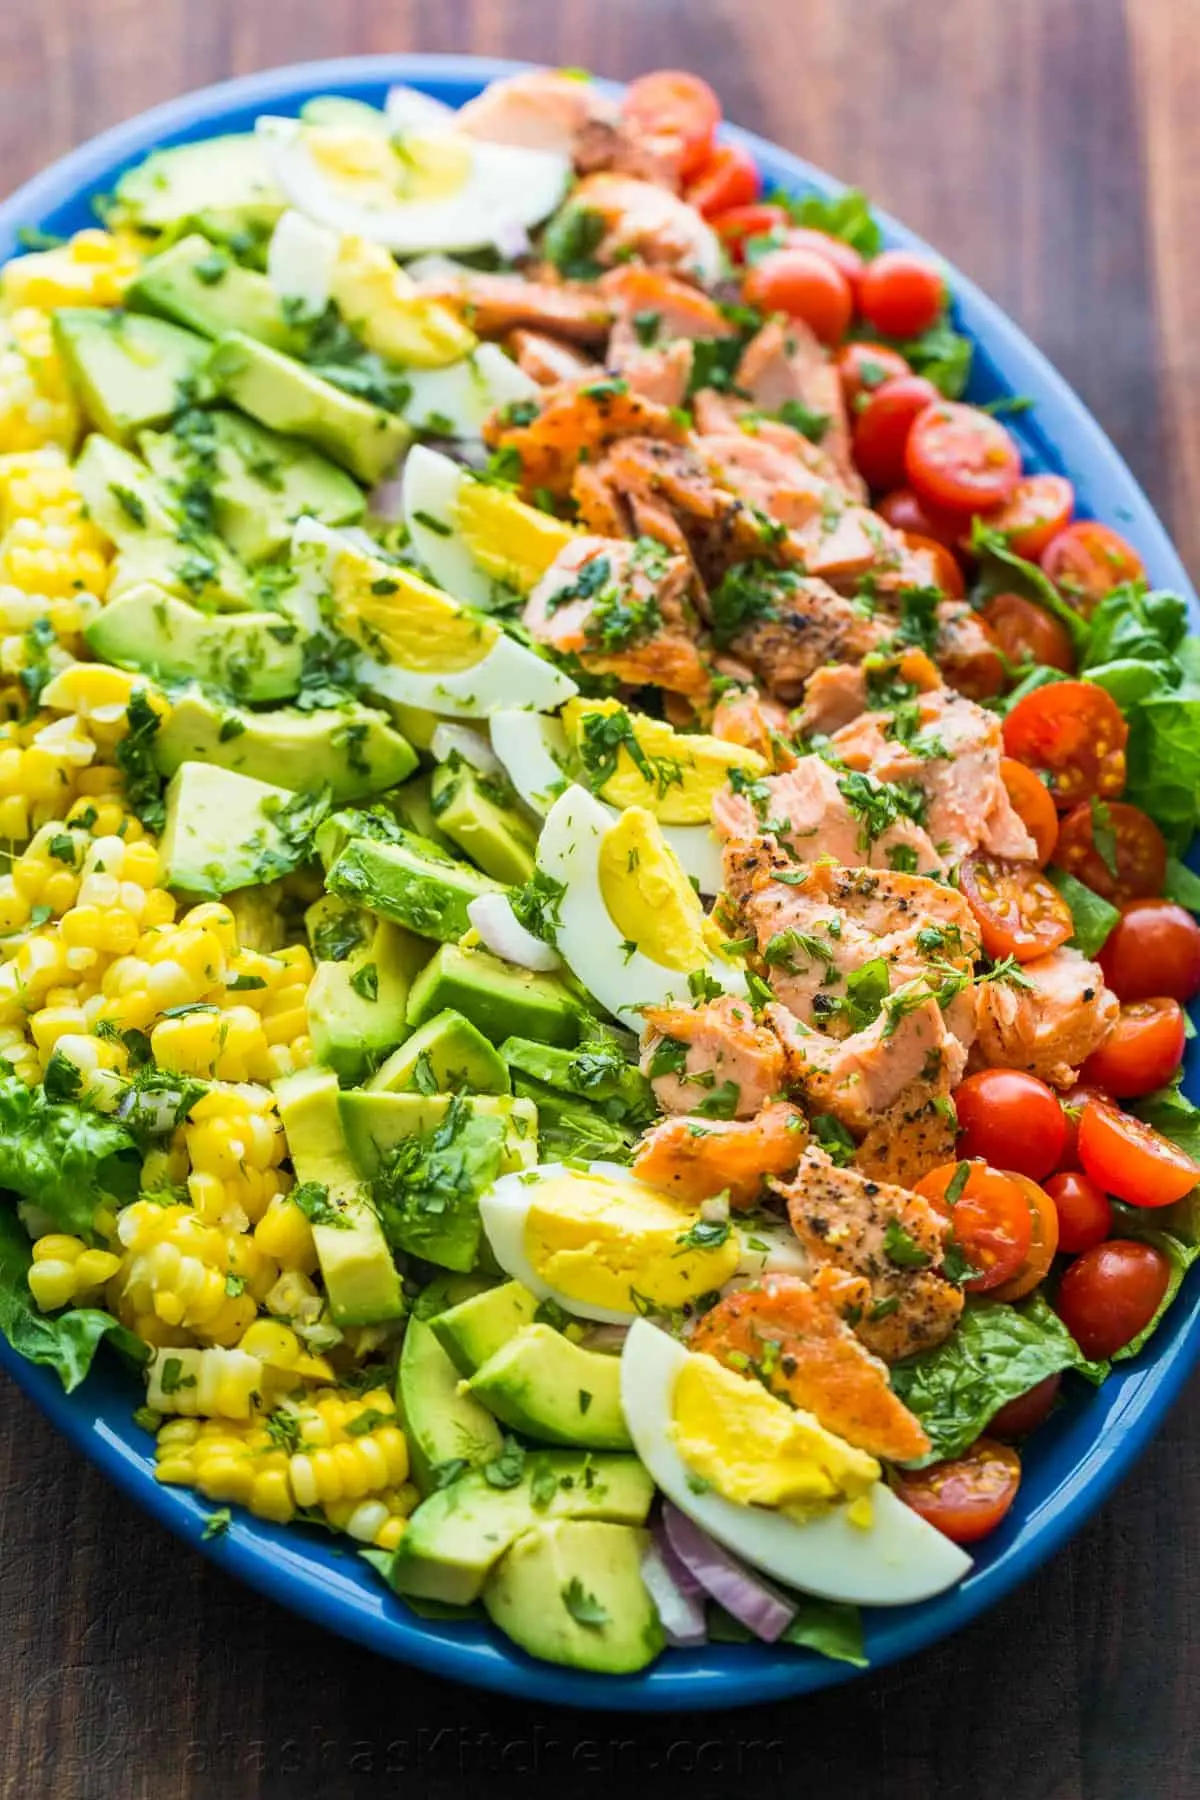 smoked salmon cobb salad - How many calories in a blackened salmon Cobb salad